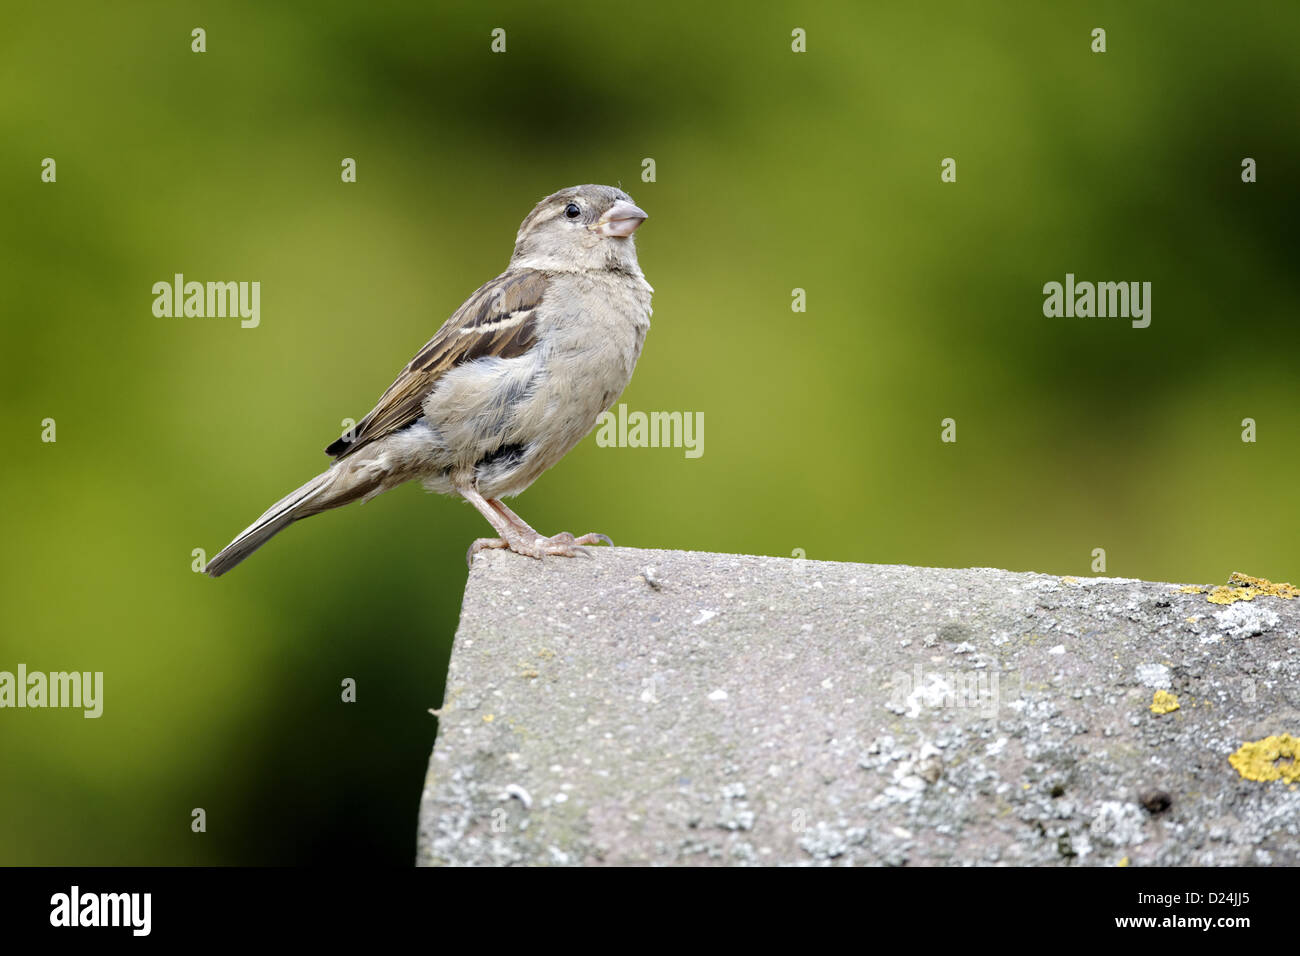 House Sparrow (Passer domesticus) adult female, standing on tiled roof, Staffordshire, England, August Stock Photo